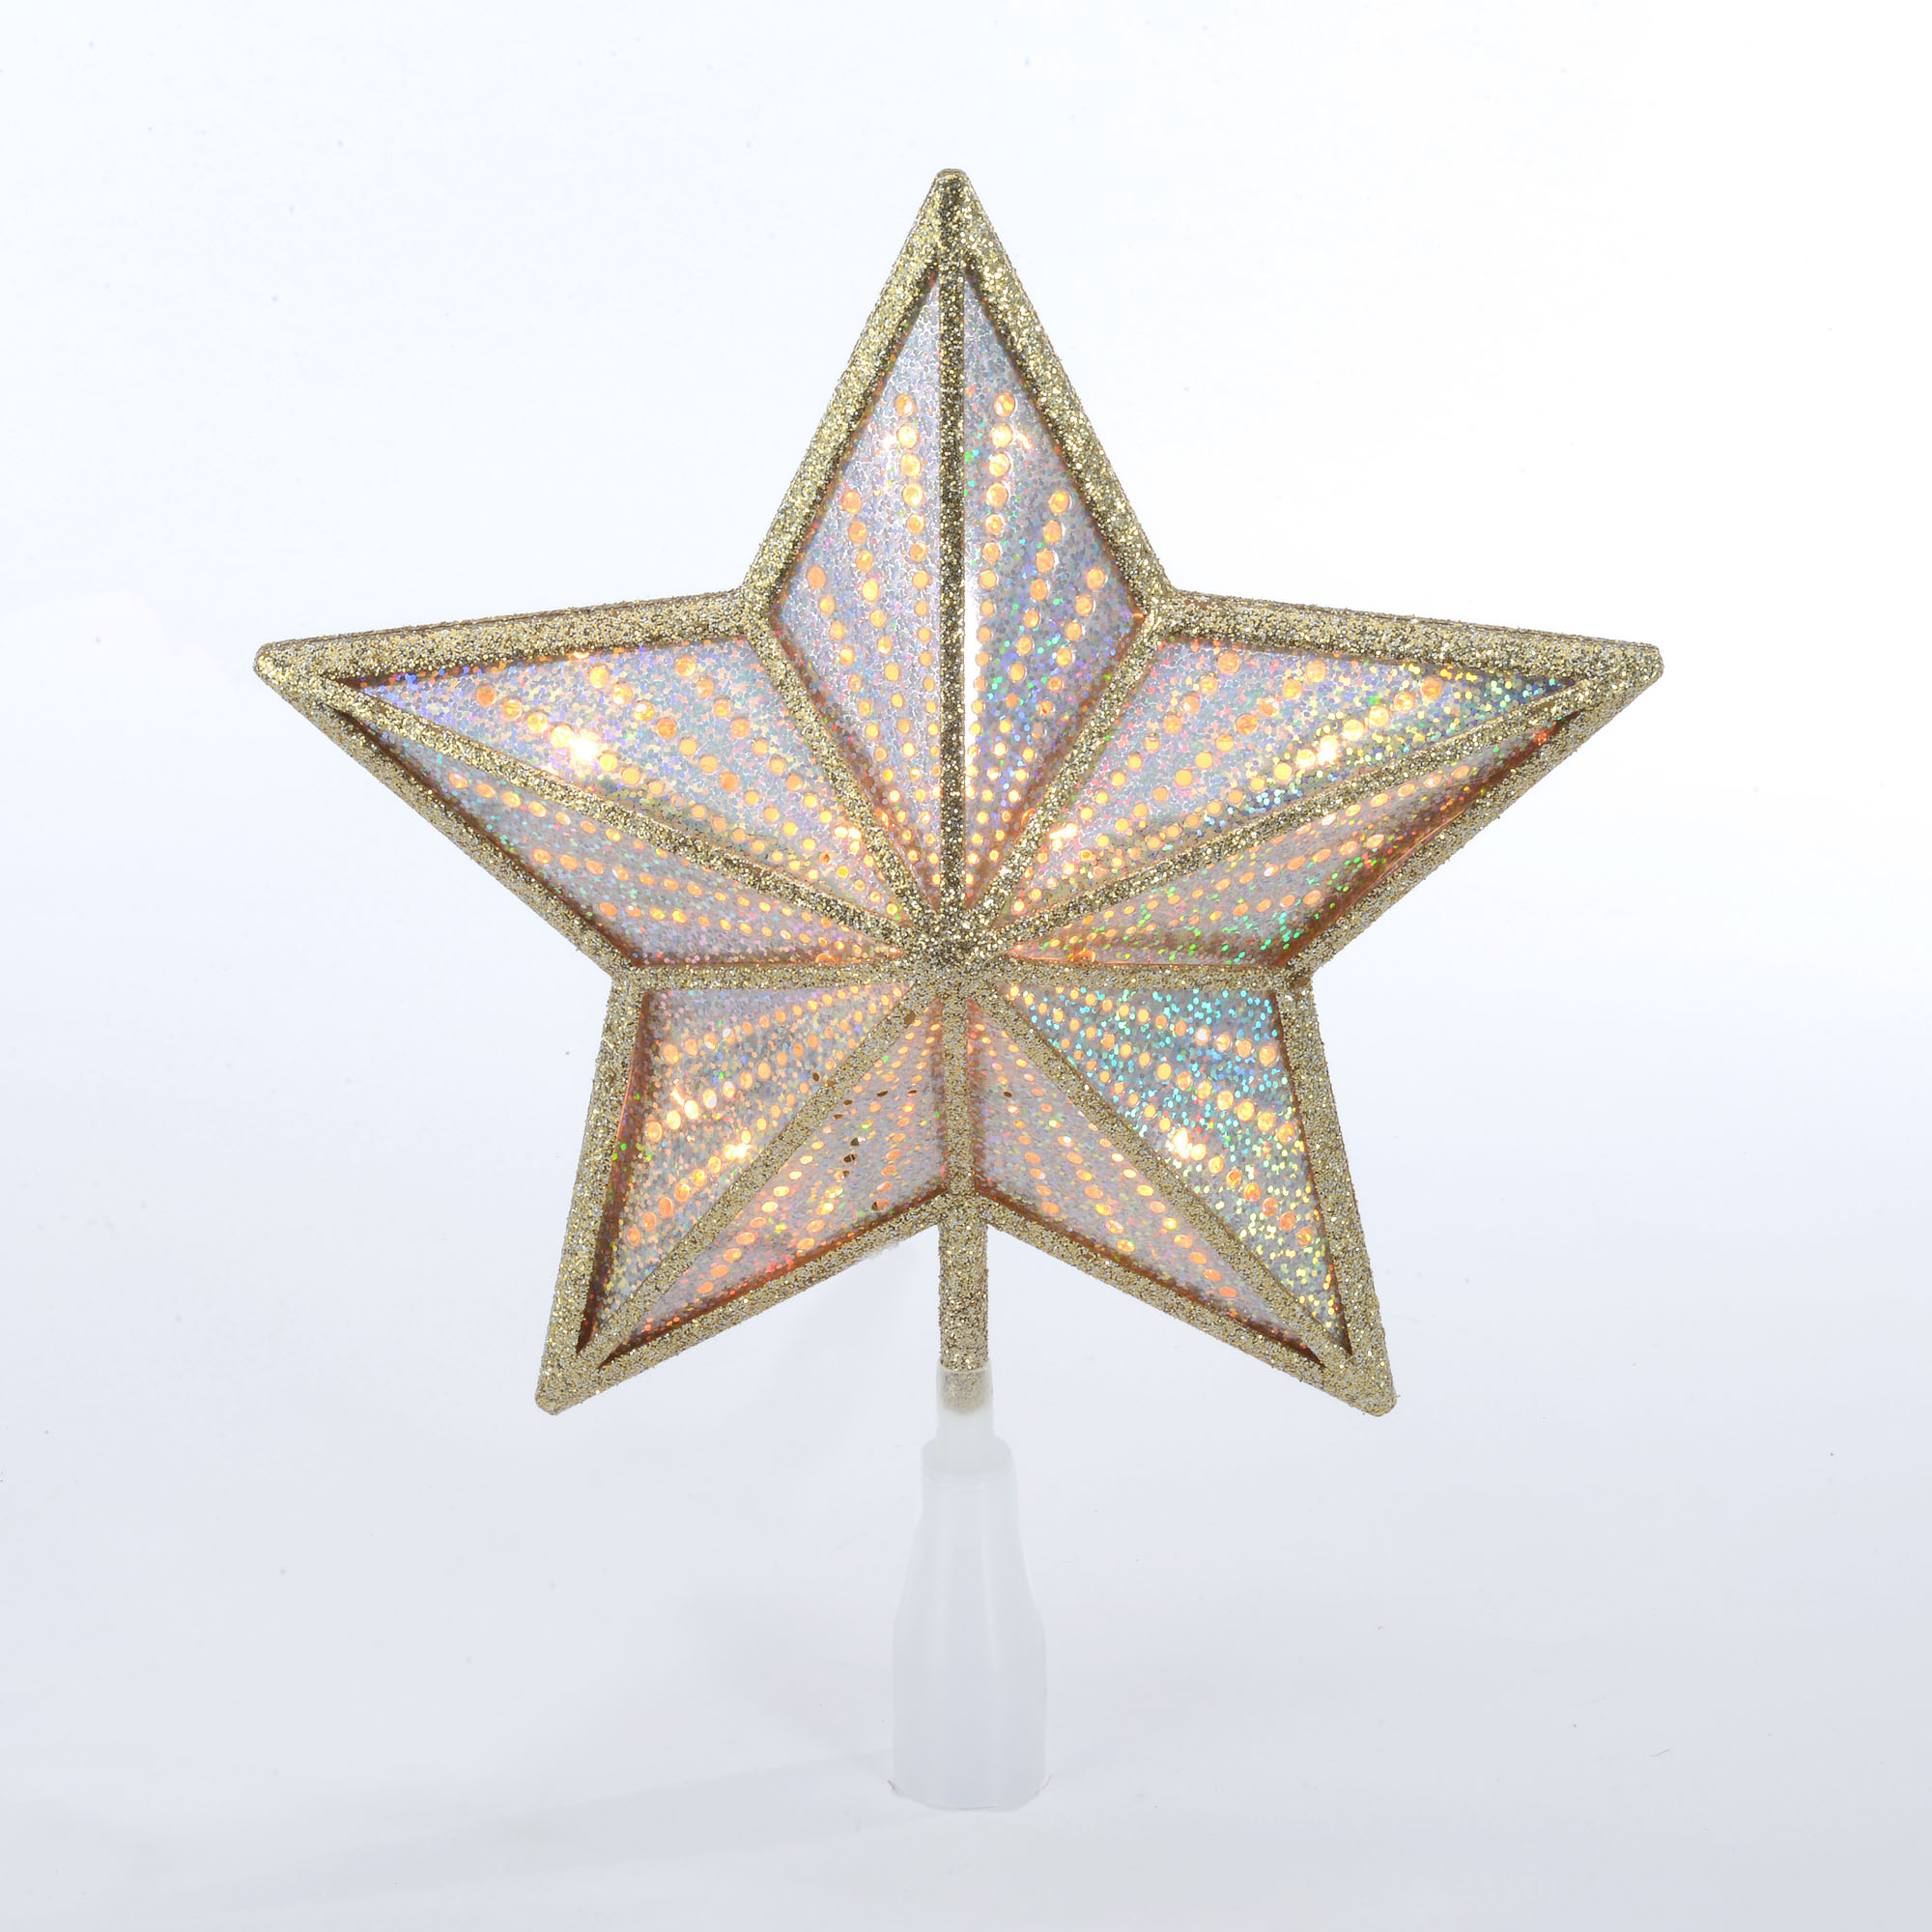 Holiday Time 12 inch Champagne Gold Star Tree Topper - image 1 of 5